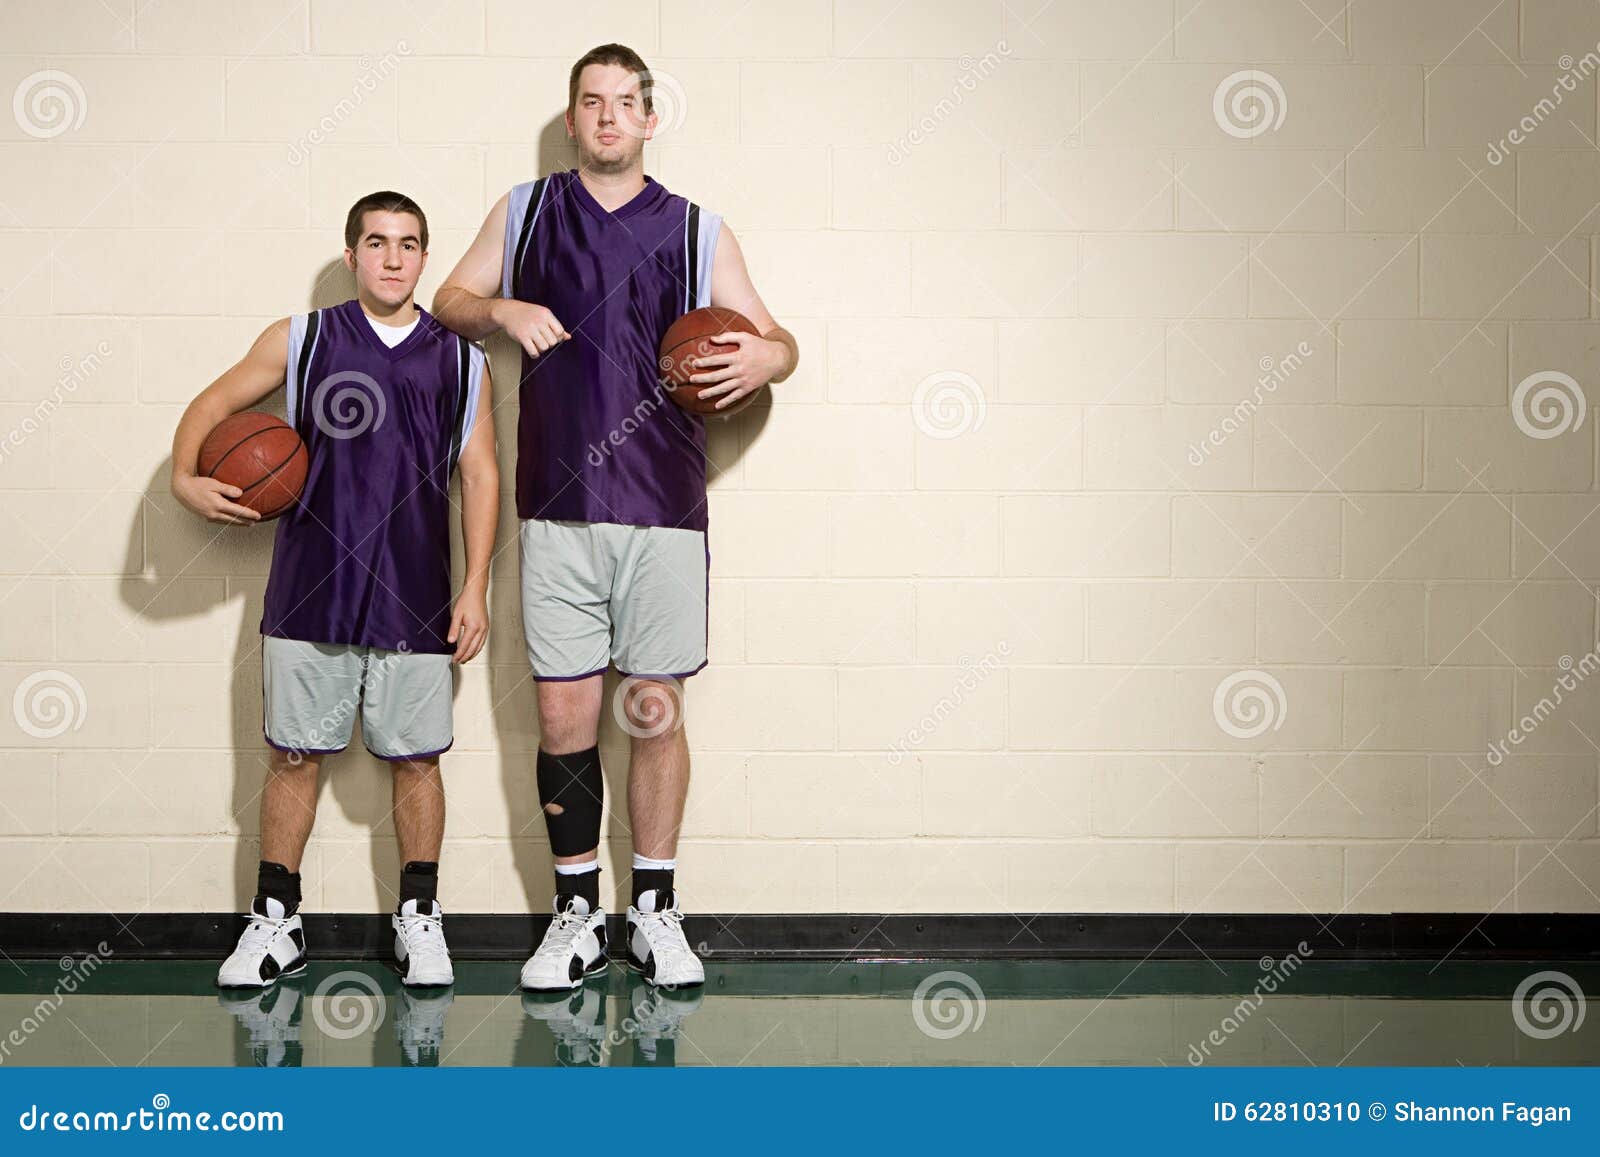 tall and short basketball players